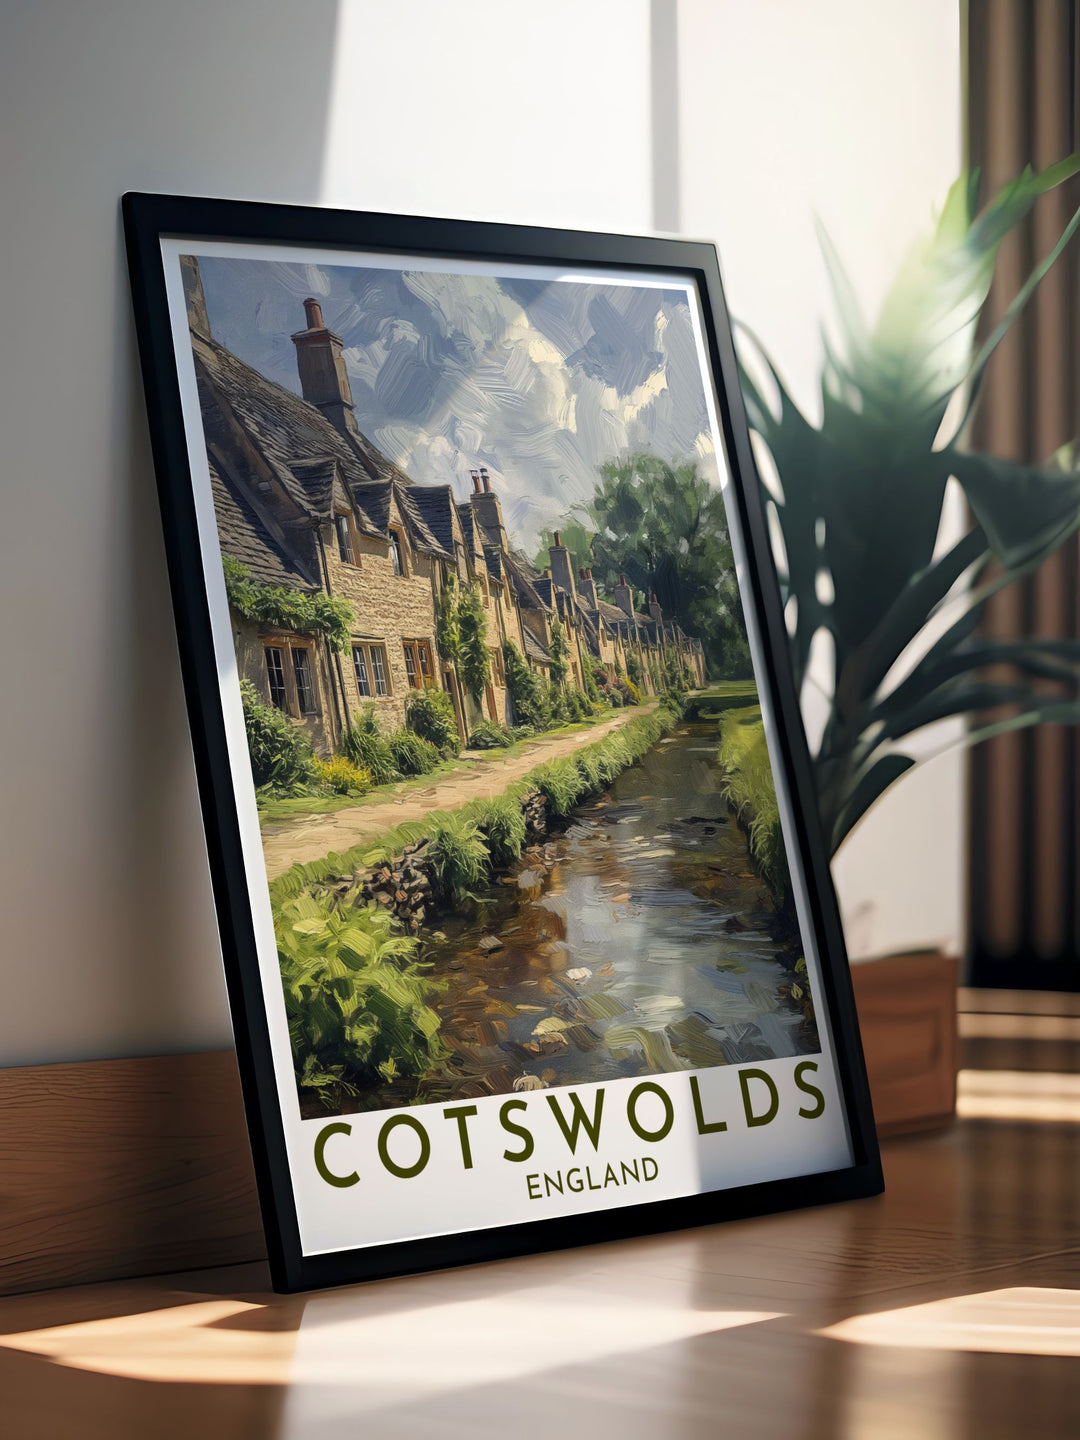 Illustrated with care, this travel poster brings to life the scenic beauty of the Cotswolds and the historical allure of Arlington Row, ideal for enhancing any room with Englands vibrant and diverse landscapes.